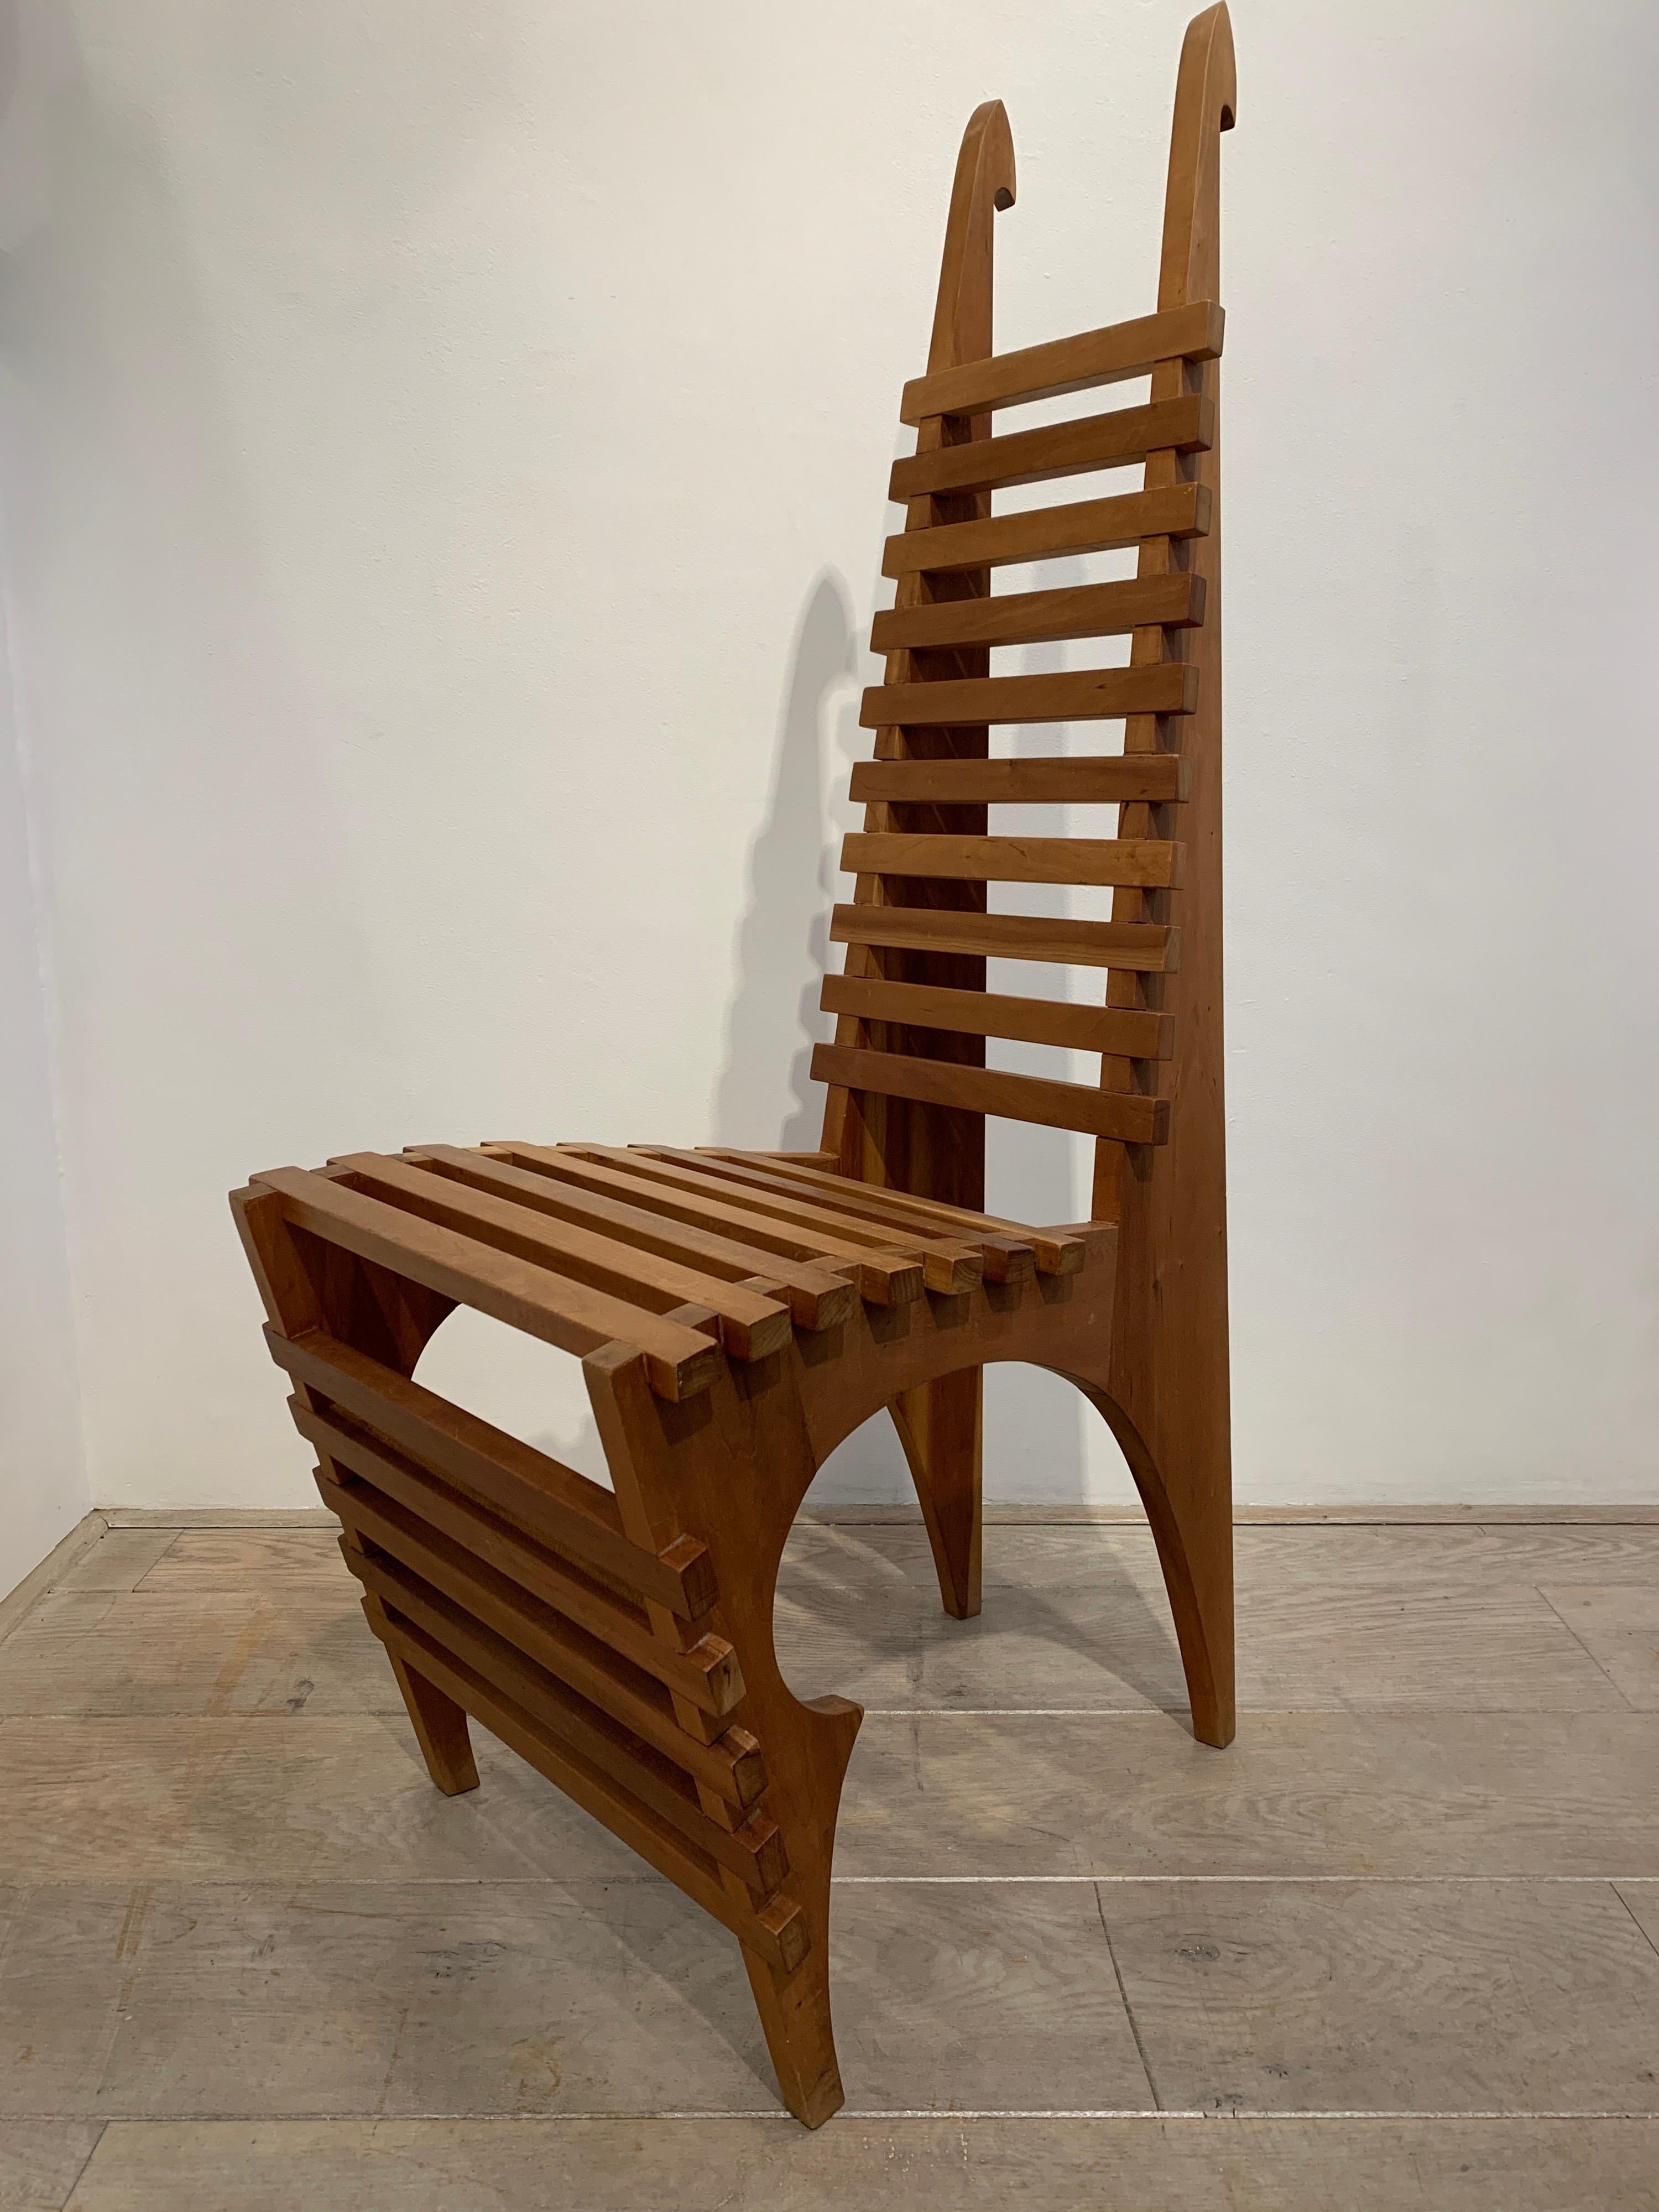 The present chair reminds of a chair in construction and style of the Great Designer Serge Manzon that he created in the late 1970s. Though signed, I am not sure about who could be the designer. Nertheless, the construction and the design are just